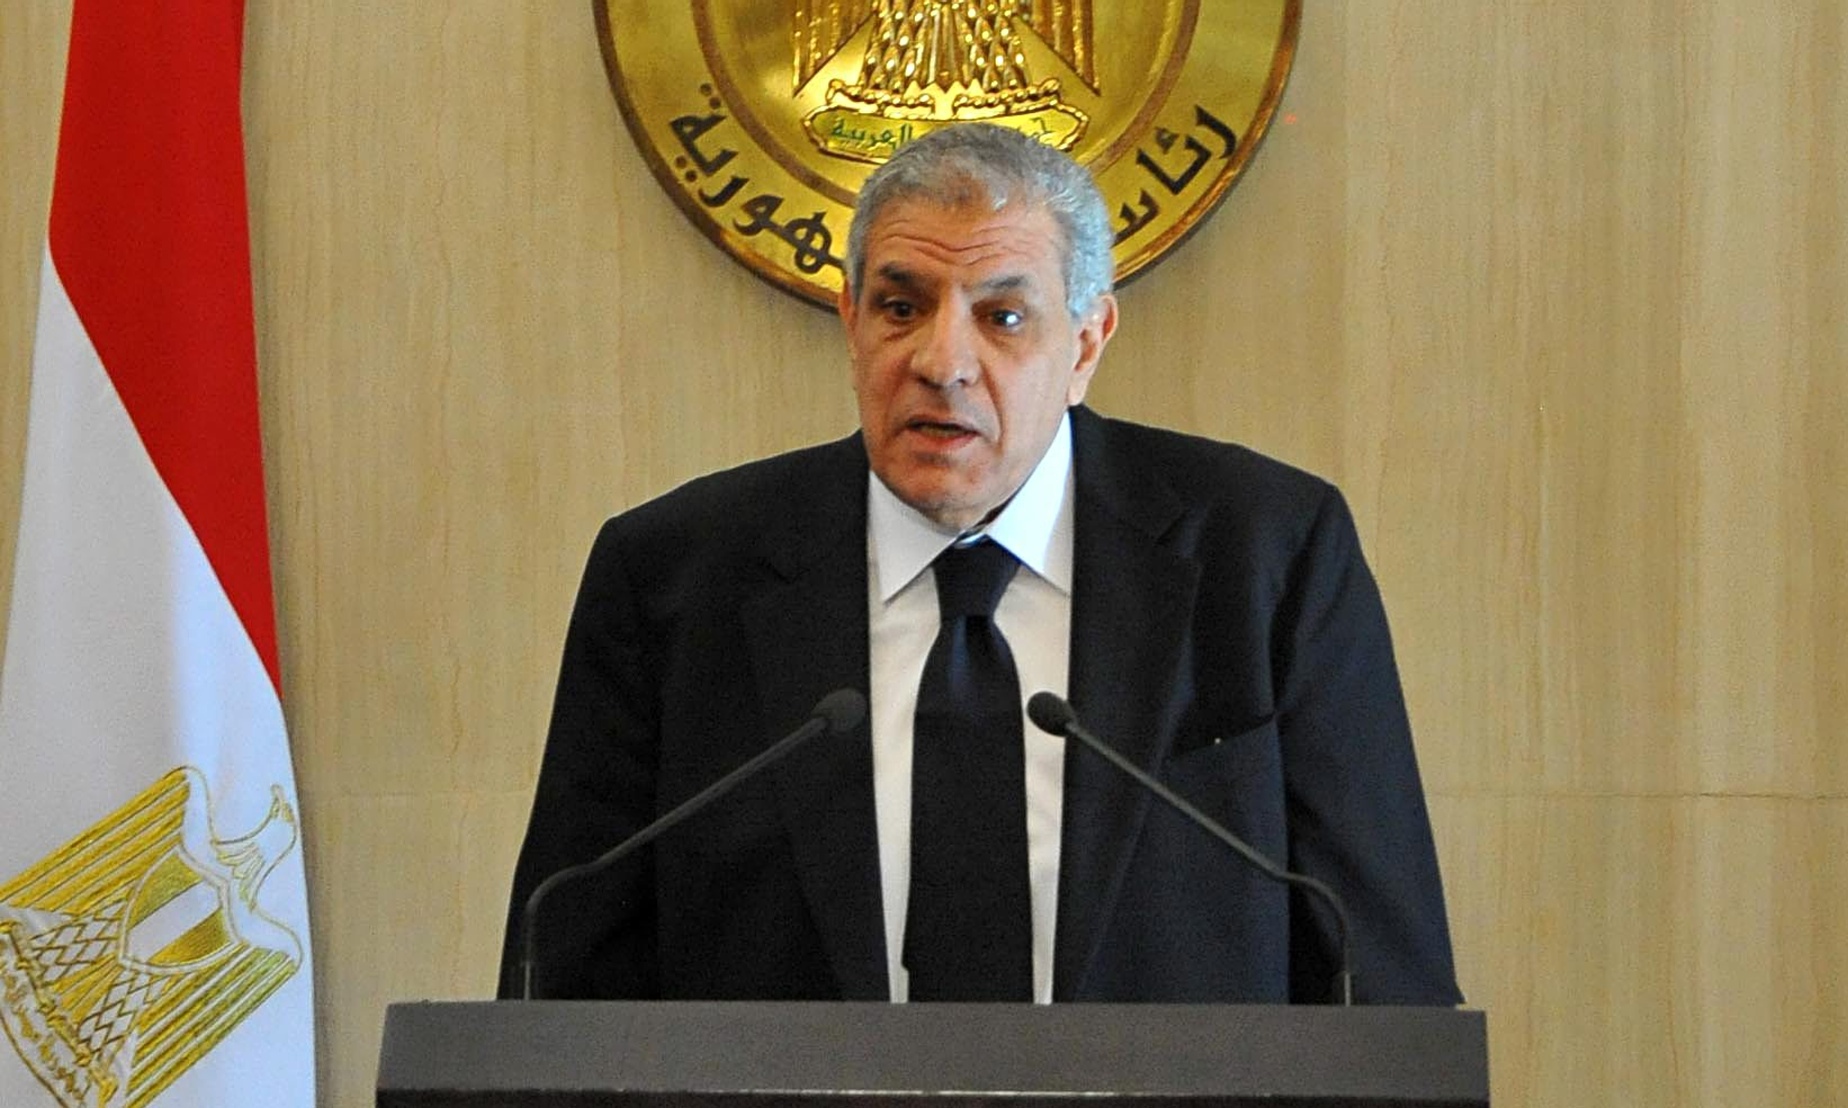     Prime Minister Ibrahim Mahlab was reappointed Monday morning as Egypt's Prime Minister.